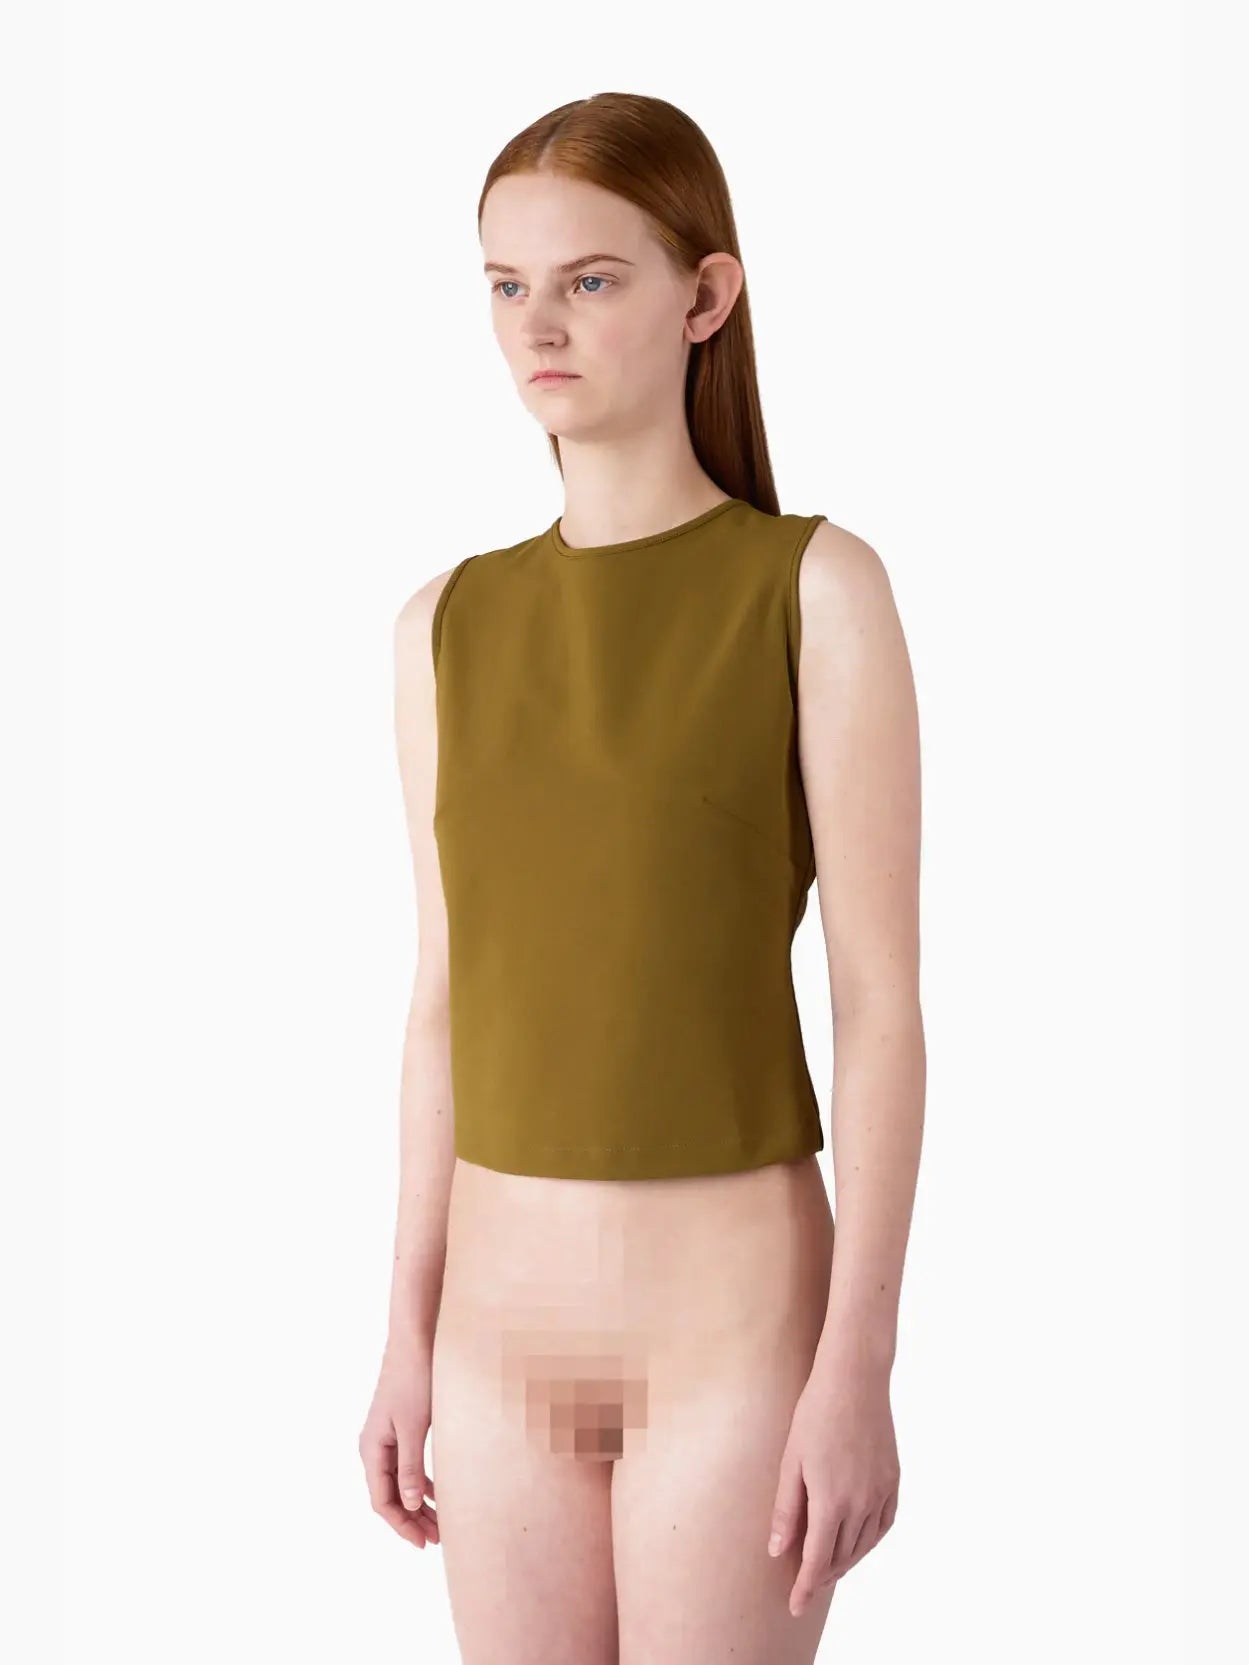 A sleeveless, olive green Buco Top Olive Green by Sunnei featuring a high neckline and a unique cut-out design at the back with a tie closure. The smooth, fitted fabric ensures a sleek silhouette. Laid flat on a white background, this chic piece is available exclusively at our Barcelona boutique, BassaLStore.